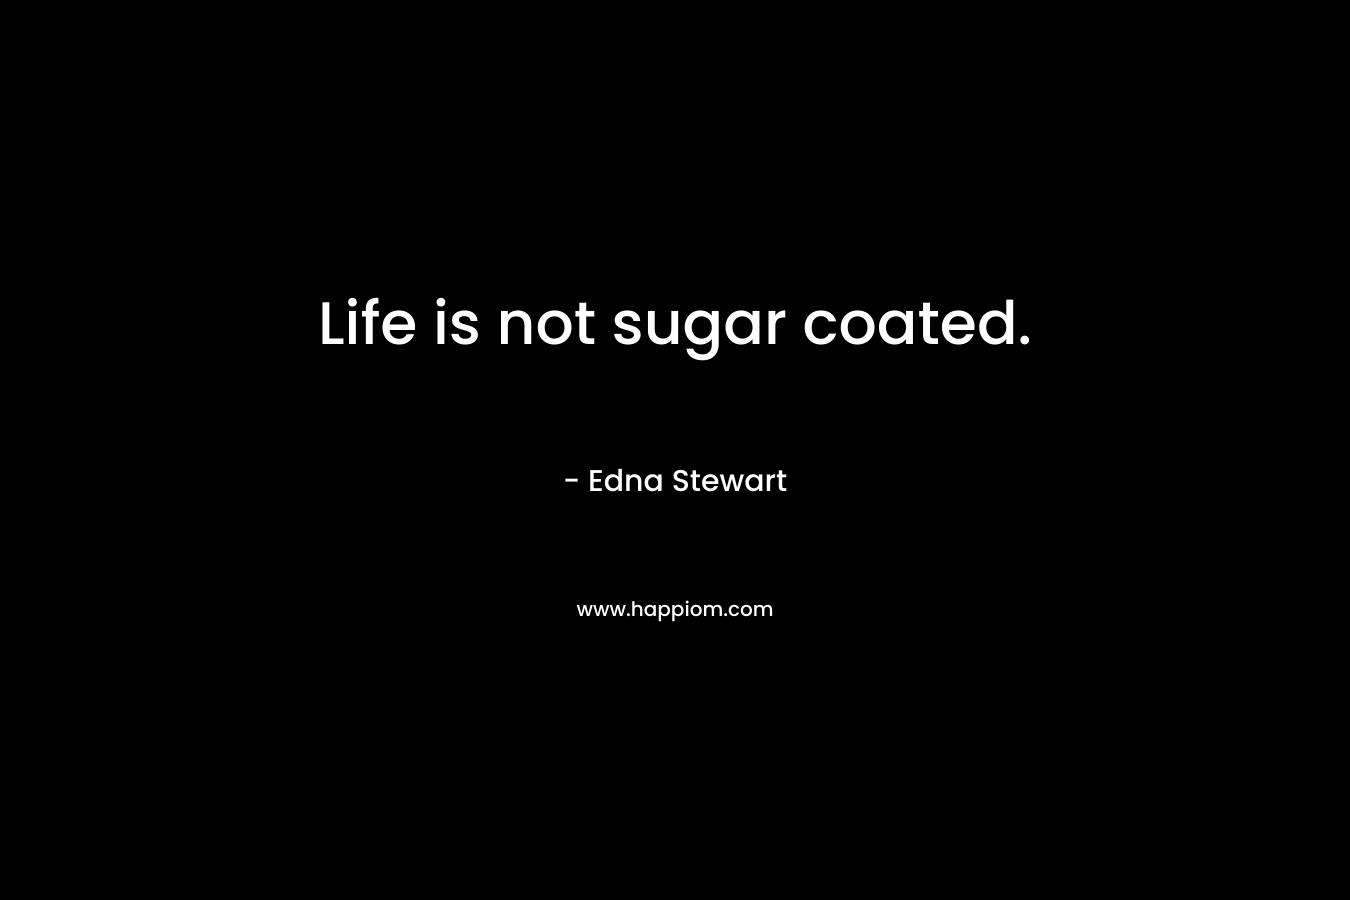 Life is not sugar coated. – Edna Stewart